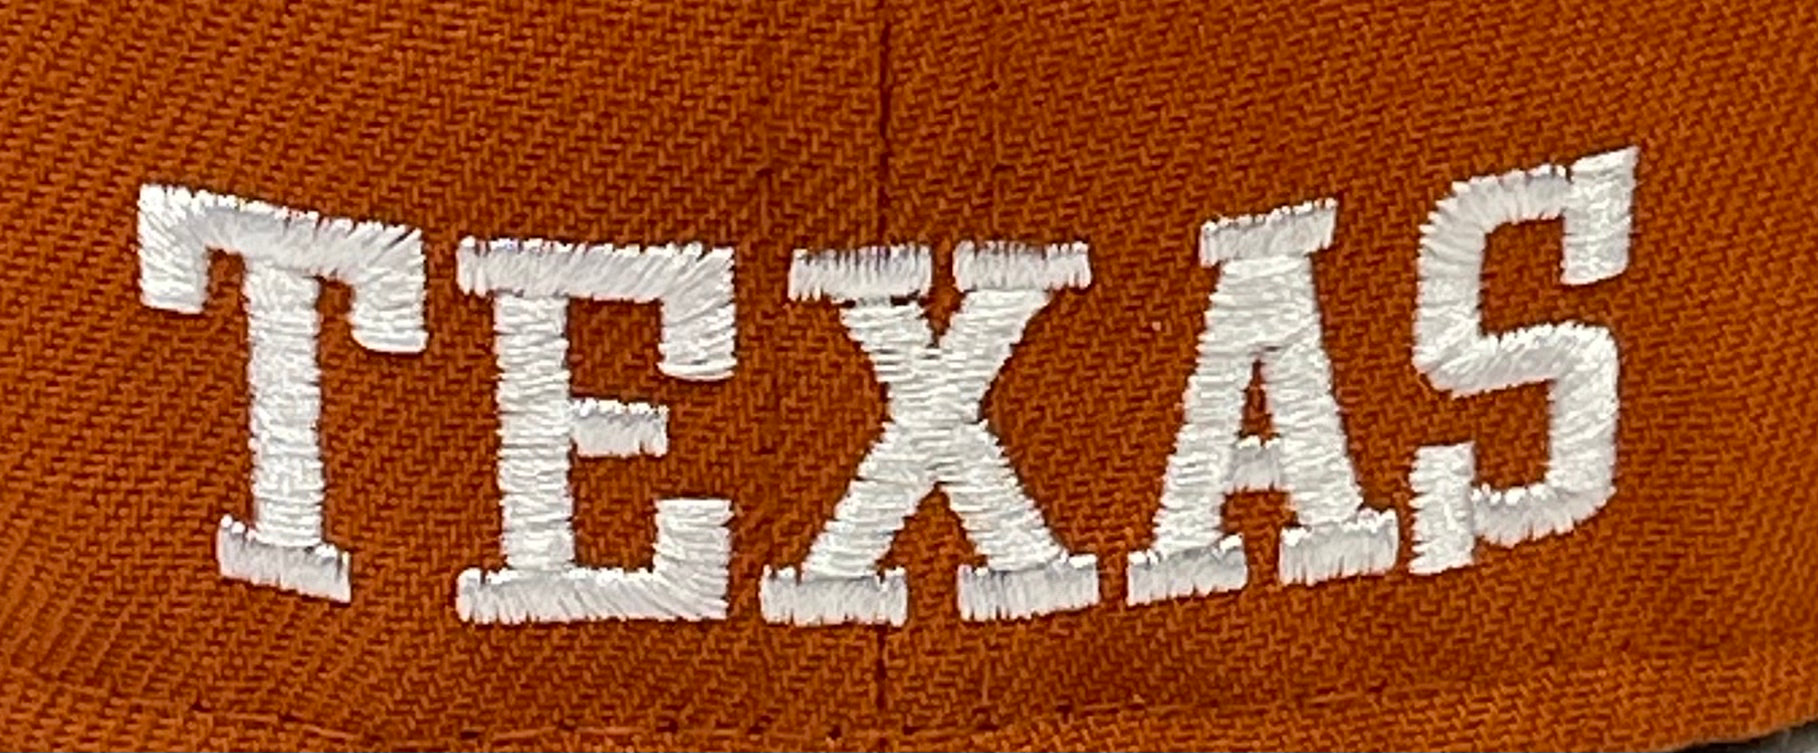 TEXAS LONGHORNS (2005 NATIONAL CHAMPIONS) NEW ERA 59FIFTY FITTED